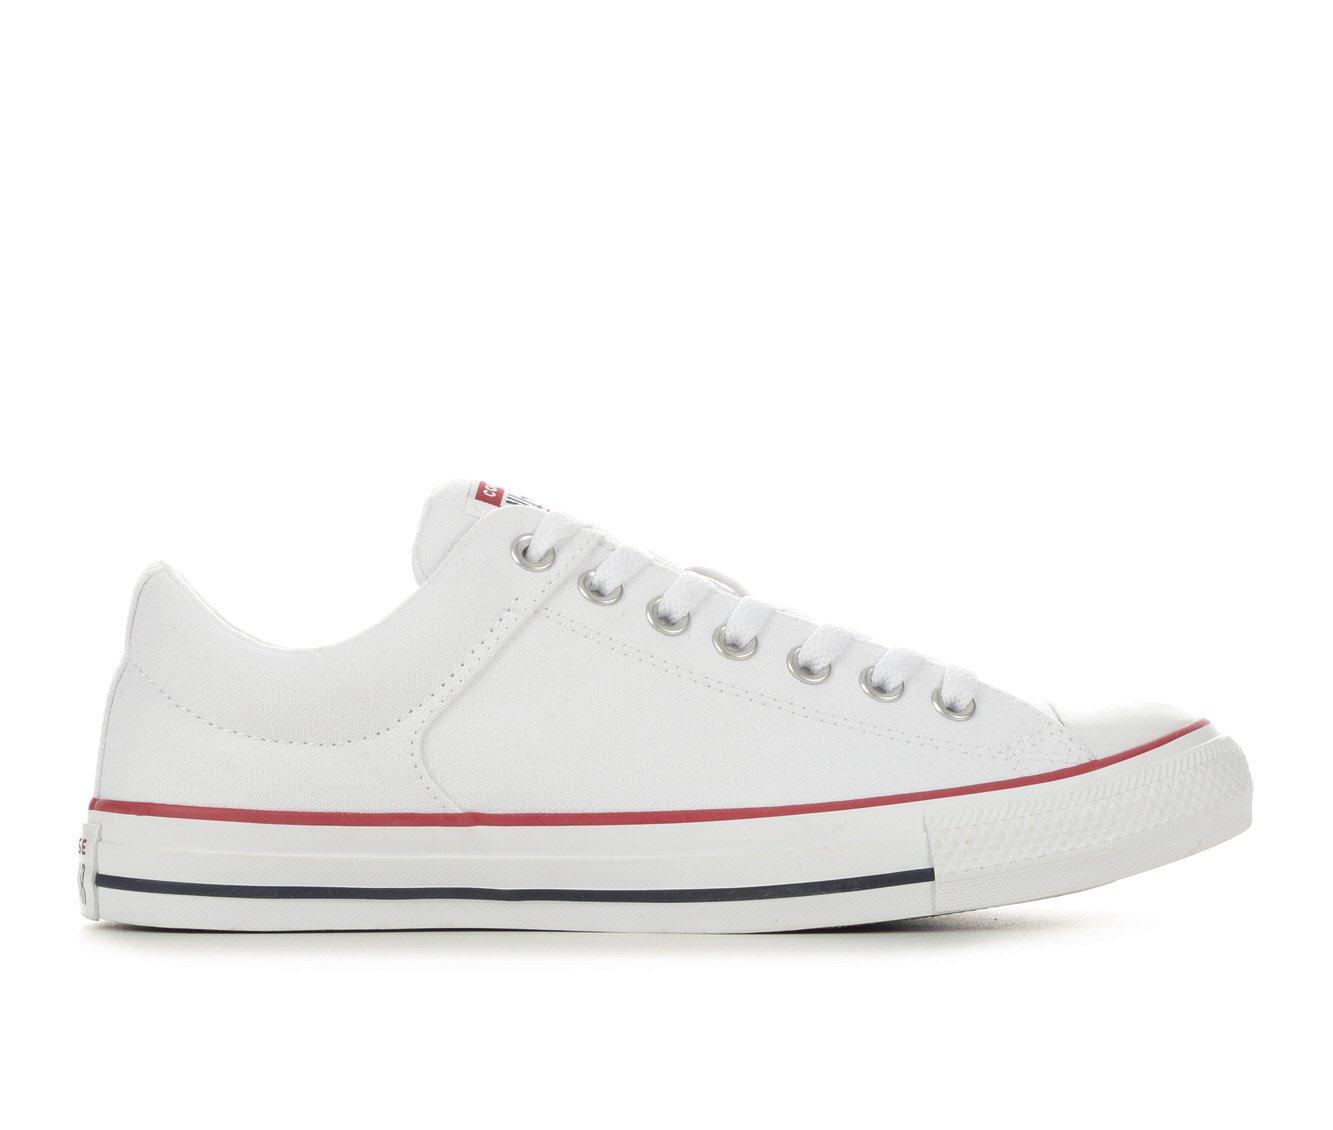 Men's Converse Chuck Taylor All Star Foundation Oxford Sneakers